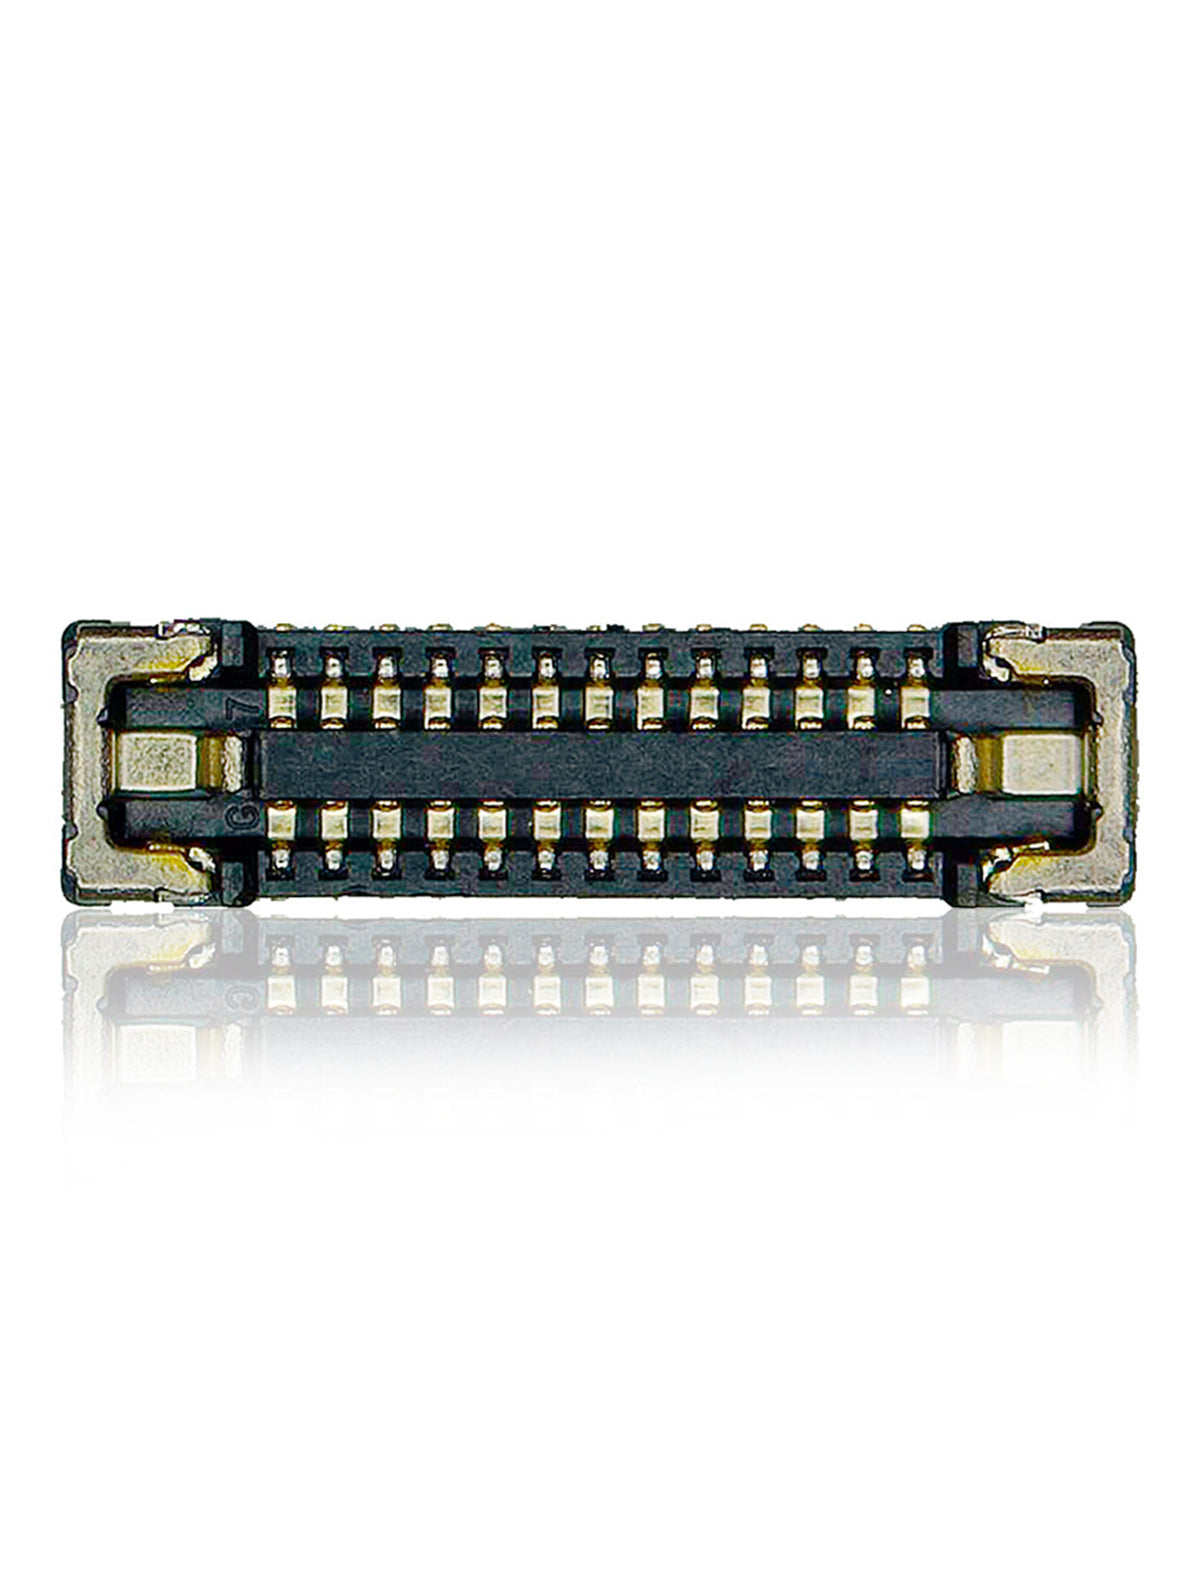 LCD FPC CONNECTOR COMPATIBLE WITH IPHONE 11 (J8000: 26 PIN)